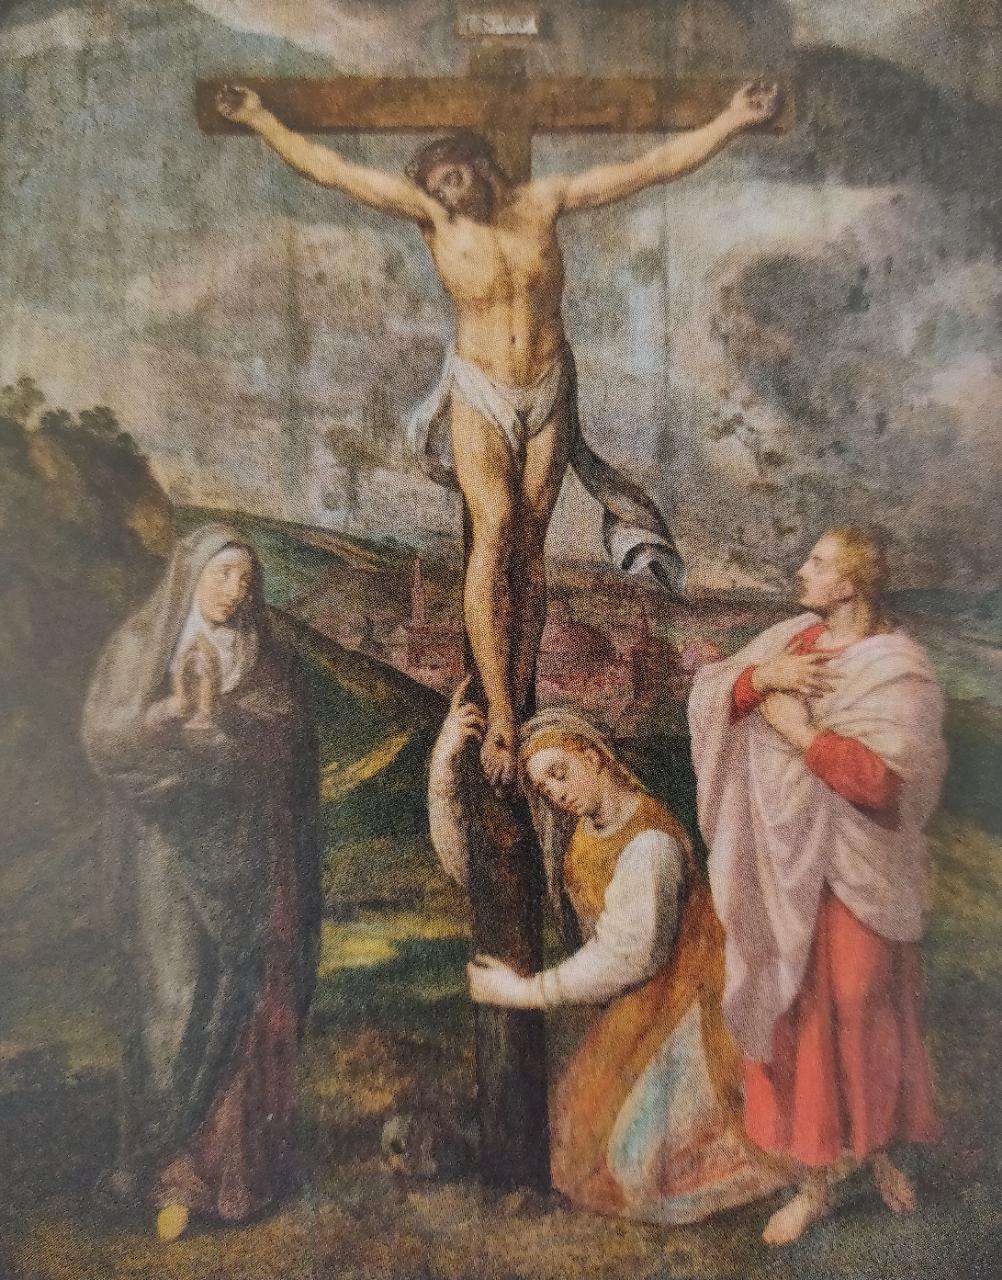 16th century crucifixion scene - Flemish old master - Antwerp, Bruges - Old Masters Painting by Frans Pourbus the Elder